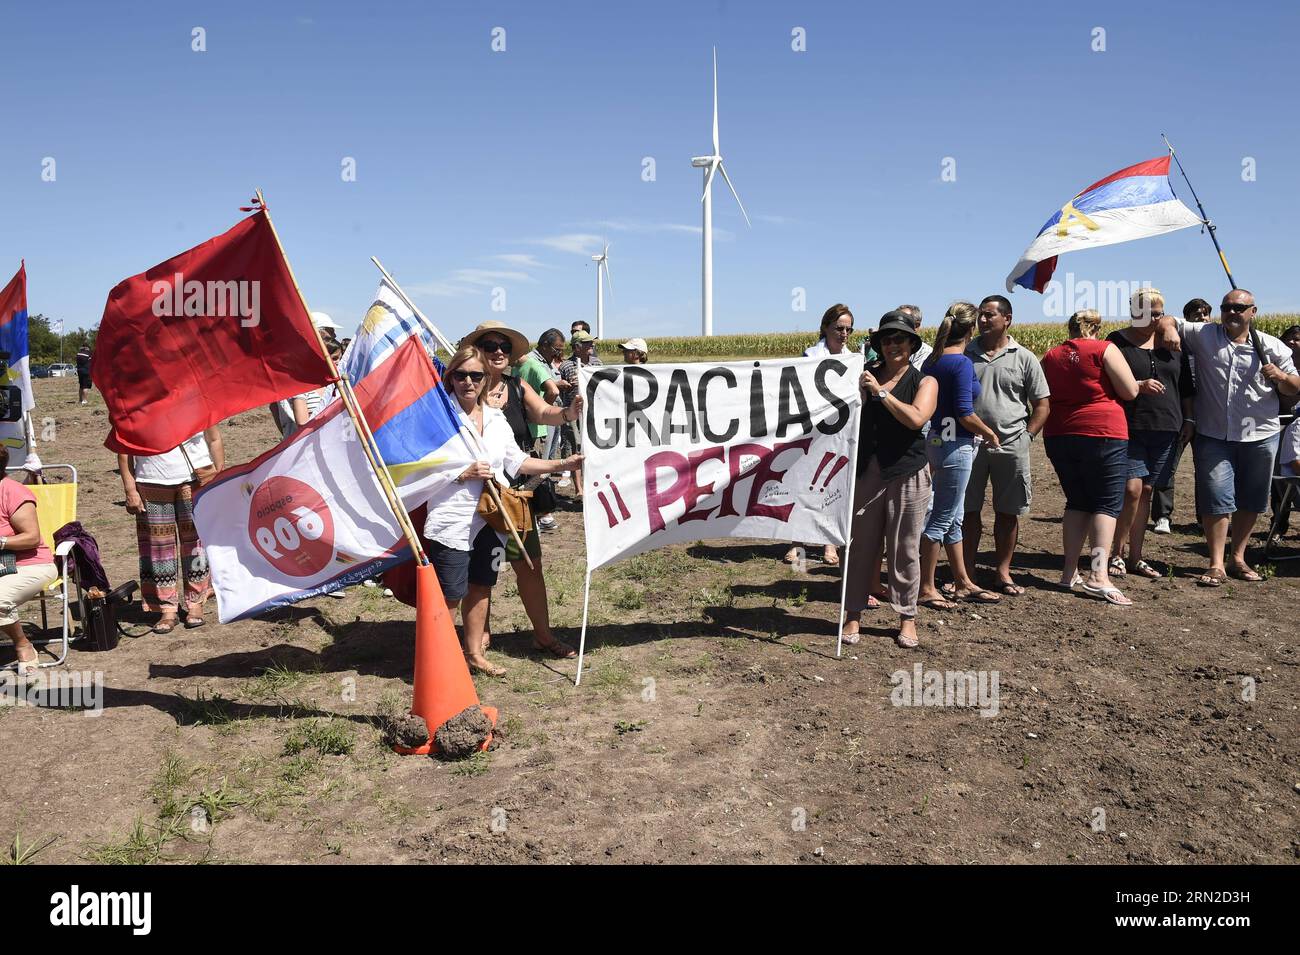 Supporters holding banners and flags attend the opening ceremony of the Wind Park, in Colonia department, 165 km from Montevideo, capital of Uruguay, on Feb. 28, 2015. The Wind Park is a joint venture between the National Administrations of Power Plants and Electrical Transmissions of Uruguay and the Brazilian Electrobras, with an investment of 100 million U.S. dollars to supply the electrical grids of both countries. Nicolas Celaya) URUGUAY-COLONIA-BRAZIL-POLITICS-WIND PARK e NICOLASxCELAYA PUBLICATIONxNOTxINxCHN   Supporters Holding Banners and Flags attend The Opening Ceremony of The Wind P Stock Photo